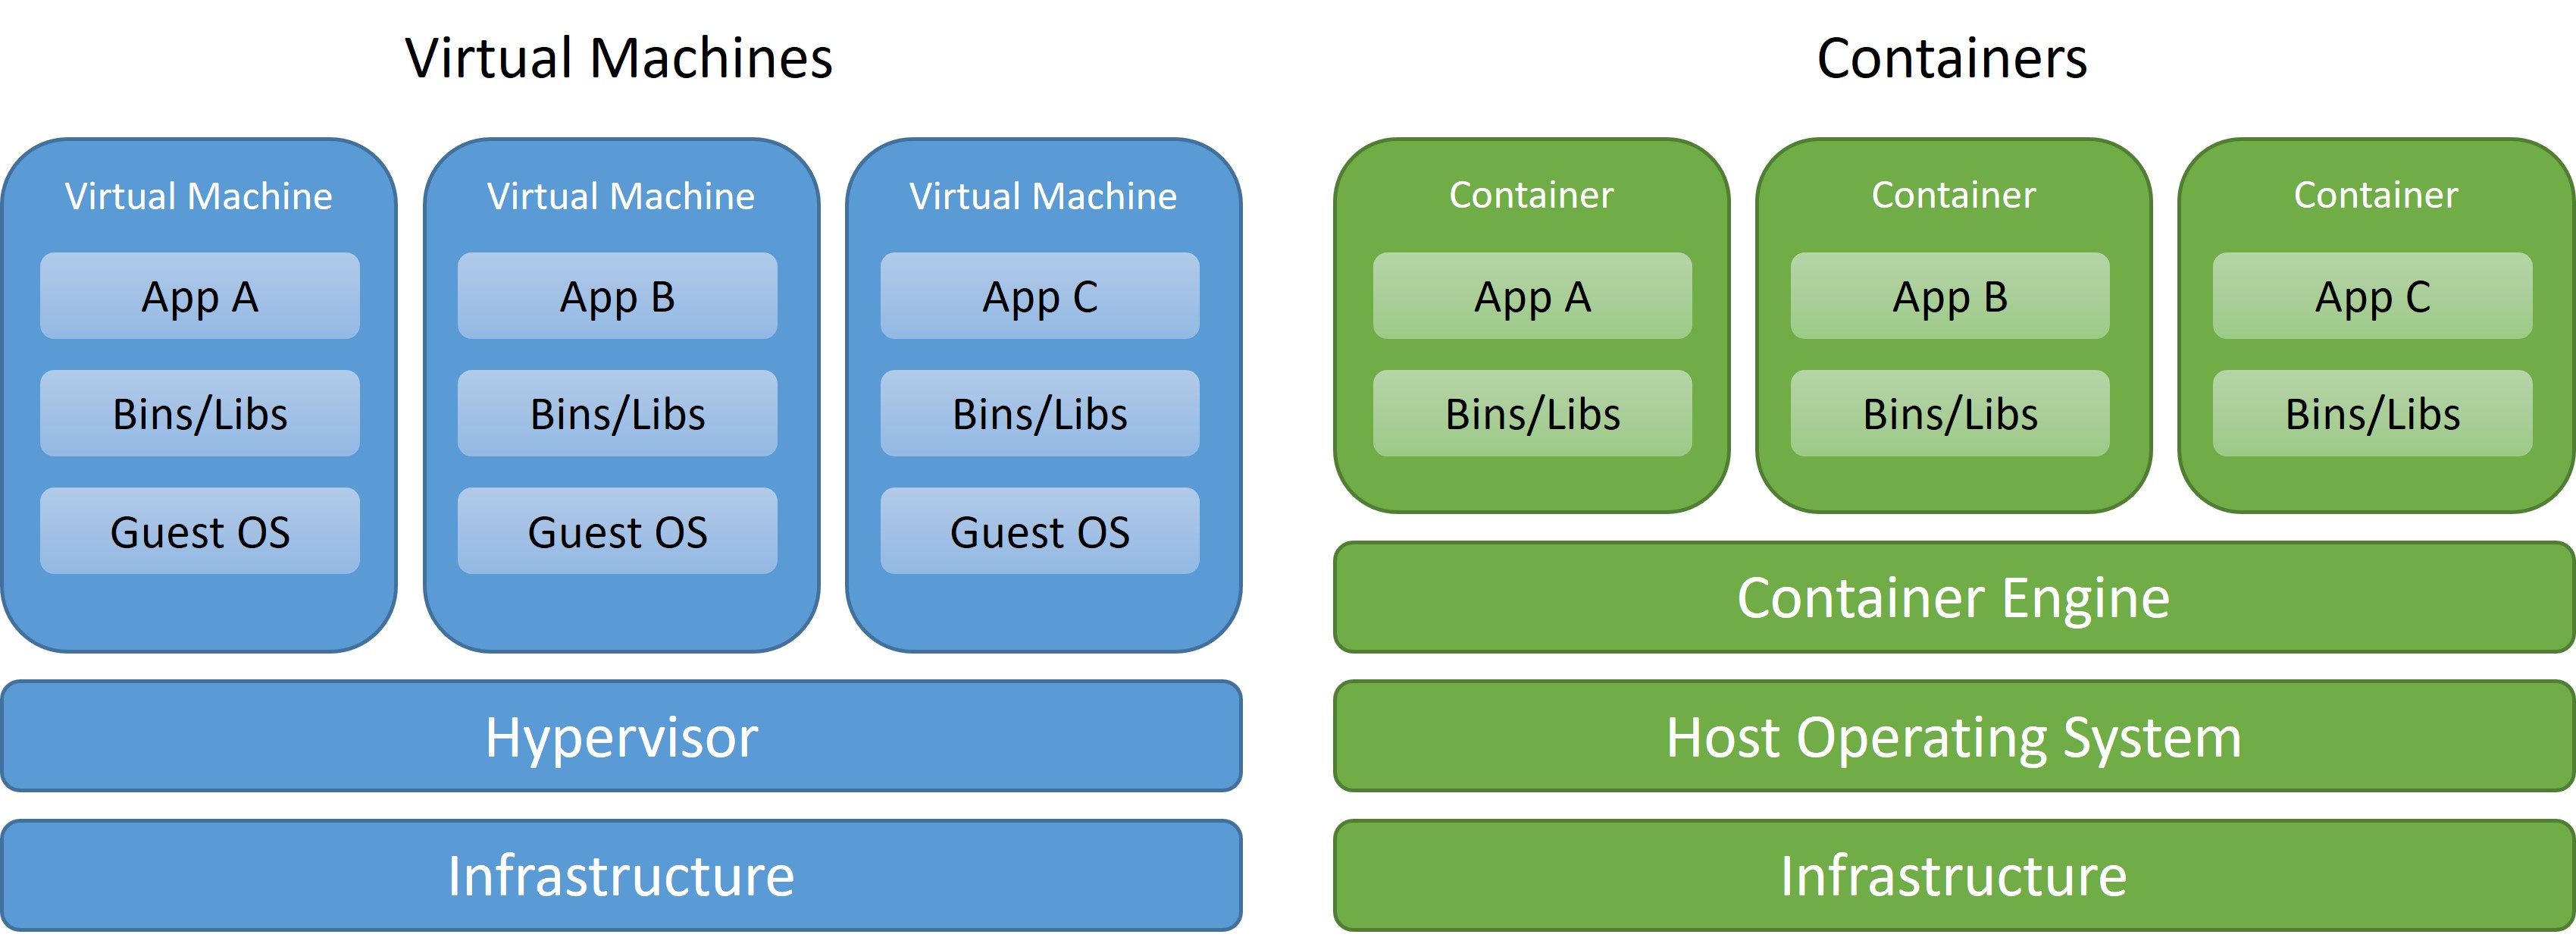 container-vs-virtual-machine Installing Kubernetes with Microk8s on a Ubuntu 22.04 LTS server